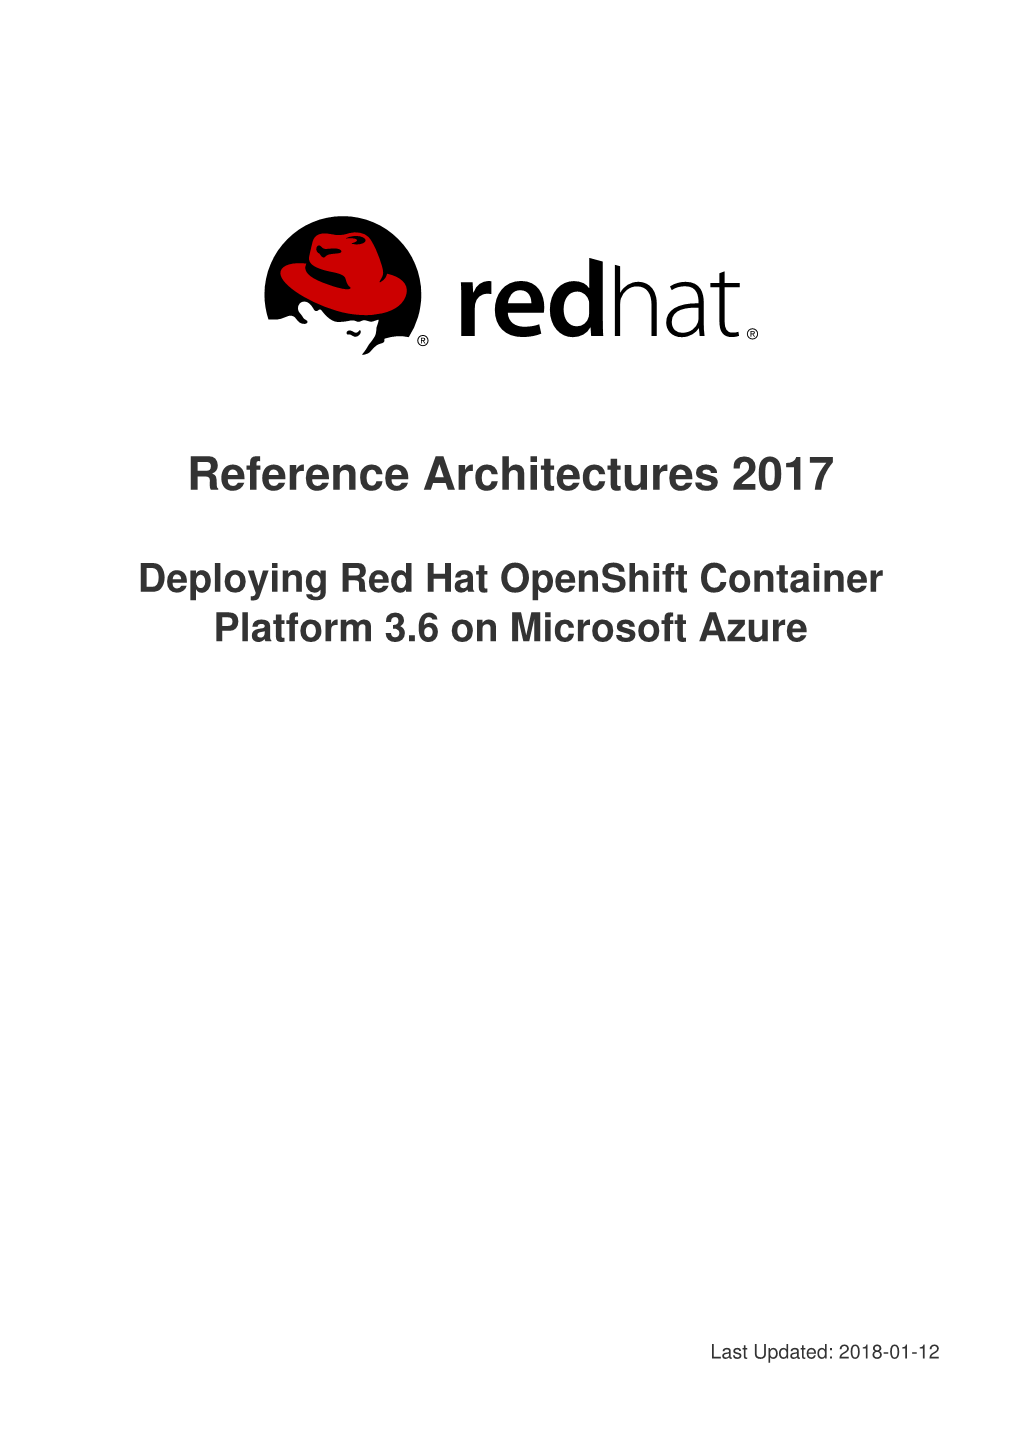 Deploying Red Hat Openshift Container Platform 3.6 on Microsoft Azure